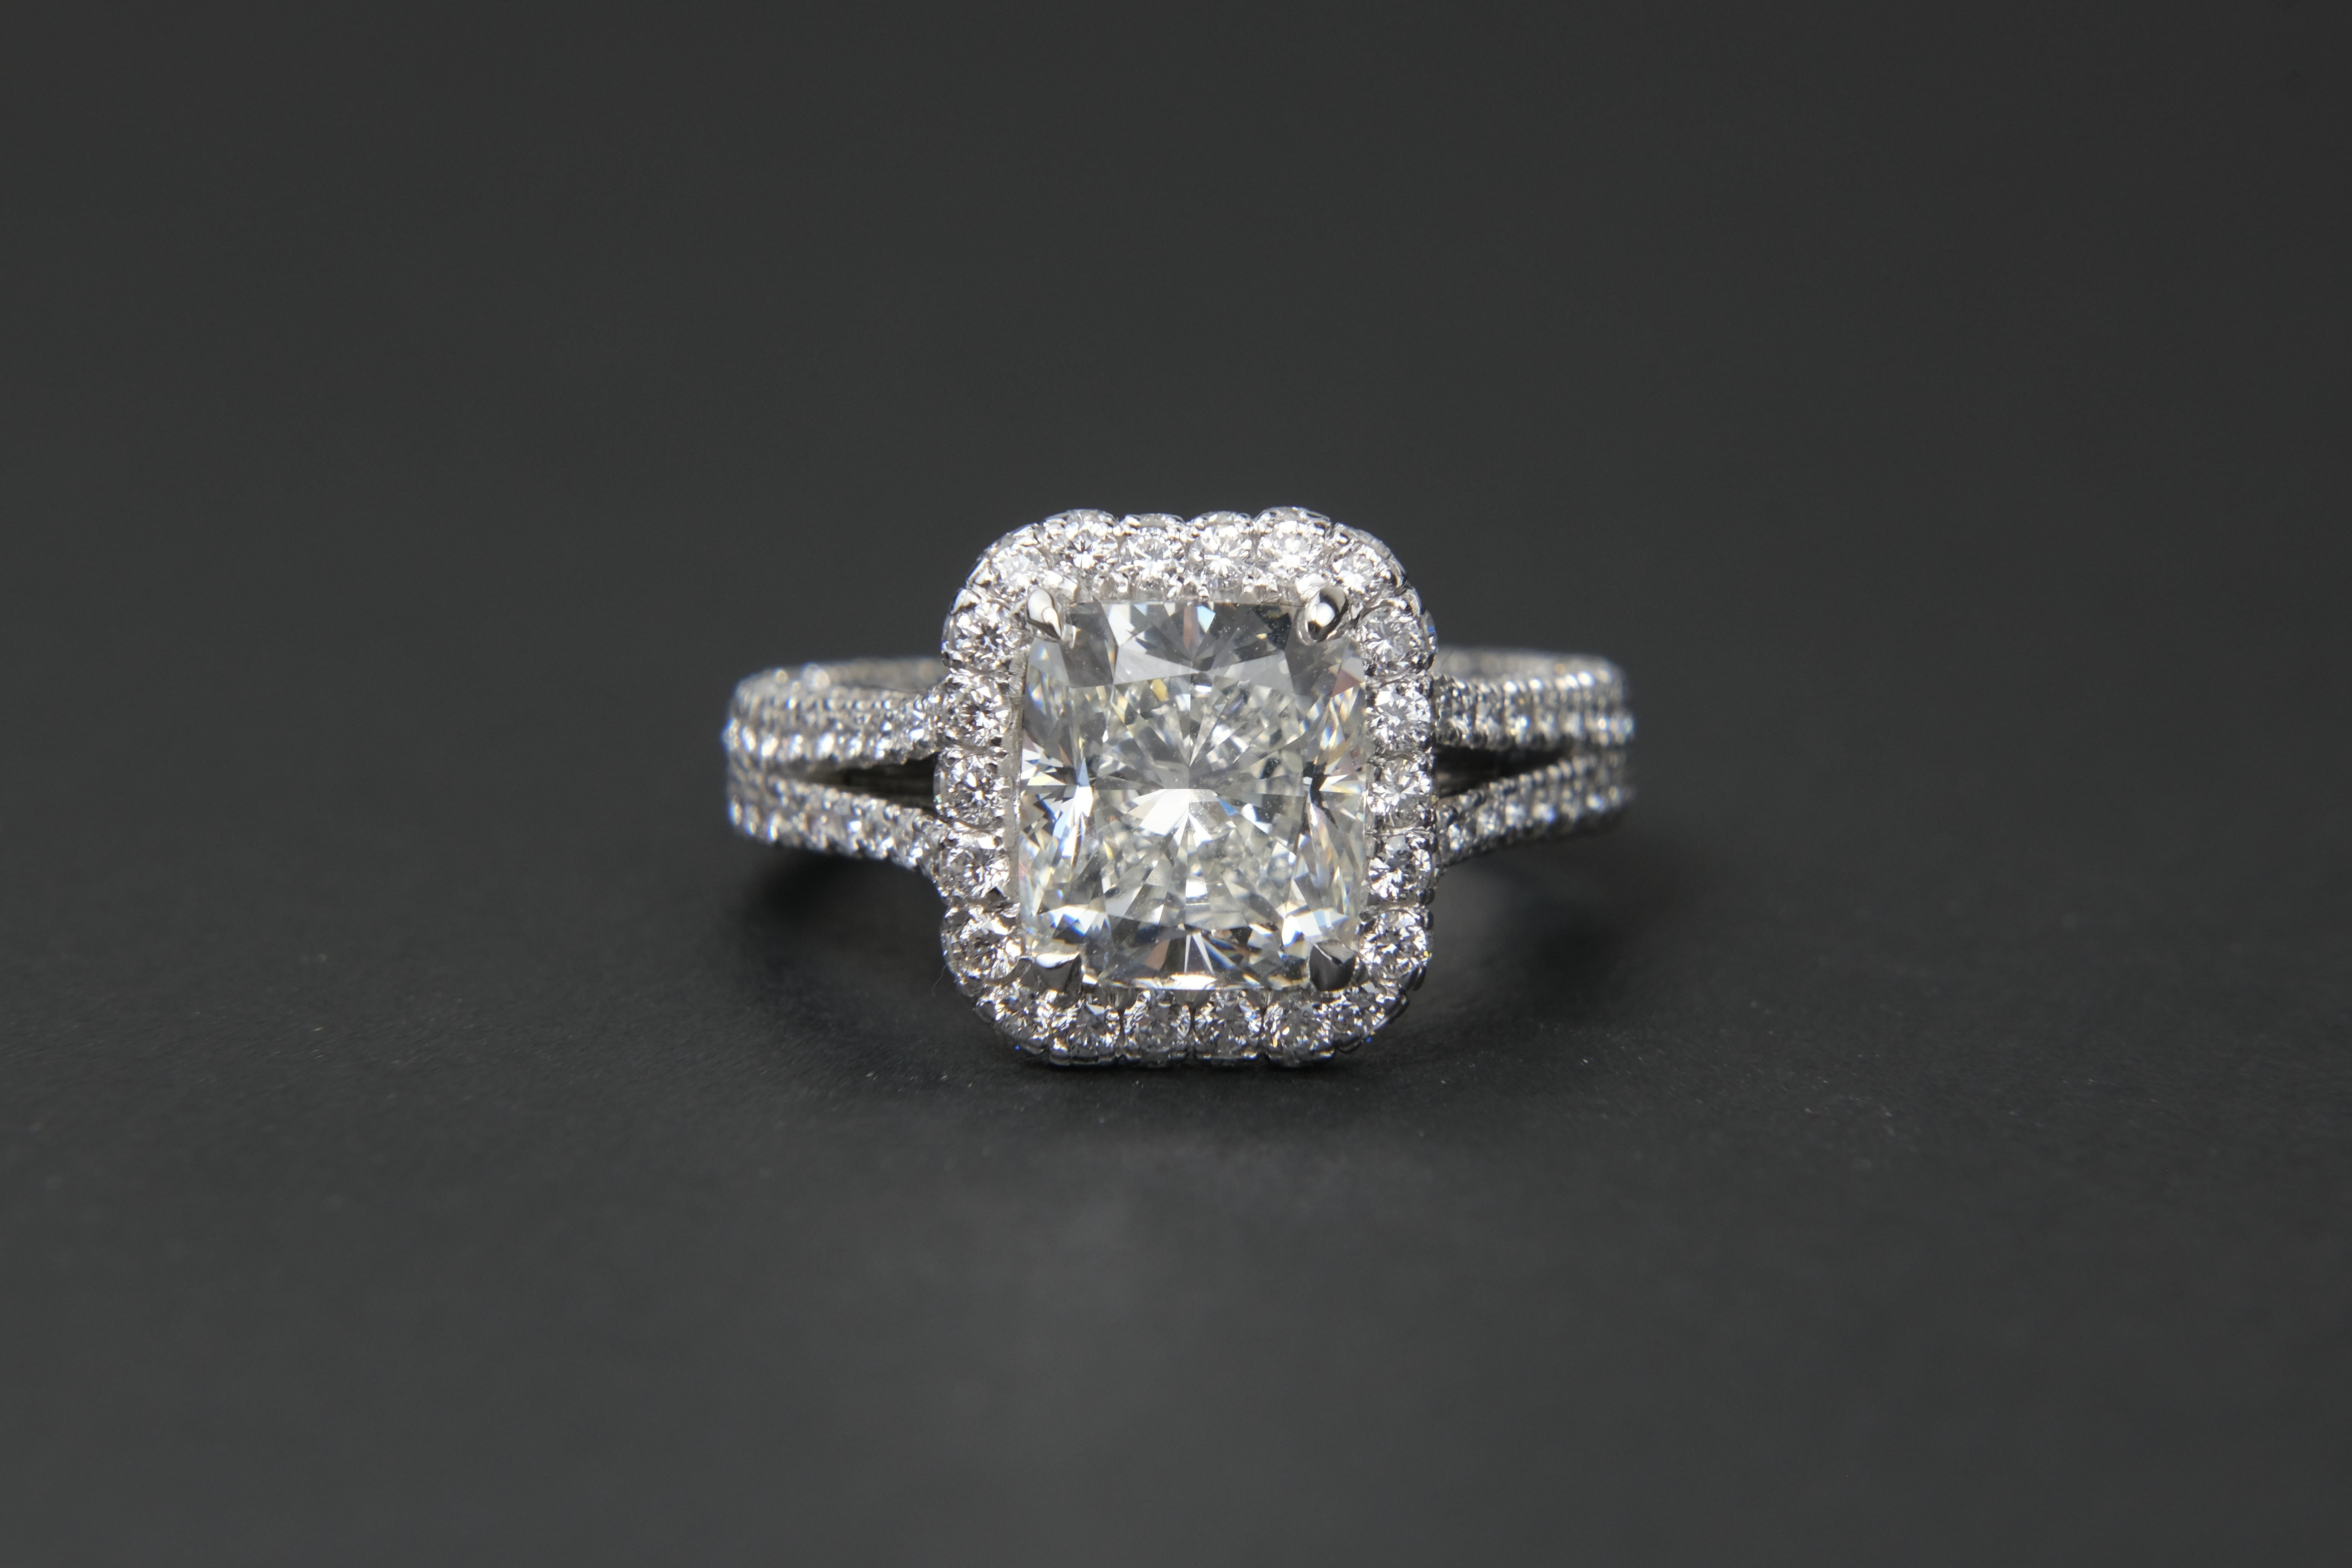 Platinum 4.46 CTW Diamond Ring with GIA Report

ELECTRONIC GIA REPORT AVAILABLE UPON REQUEST

It is hard to not wax enthusiastic about great diamonds and repeat oneself when describing jewelry. Anything I can say about this ring I have no doubt said